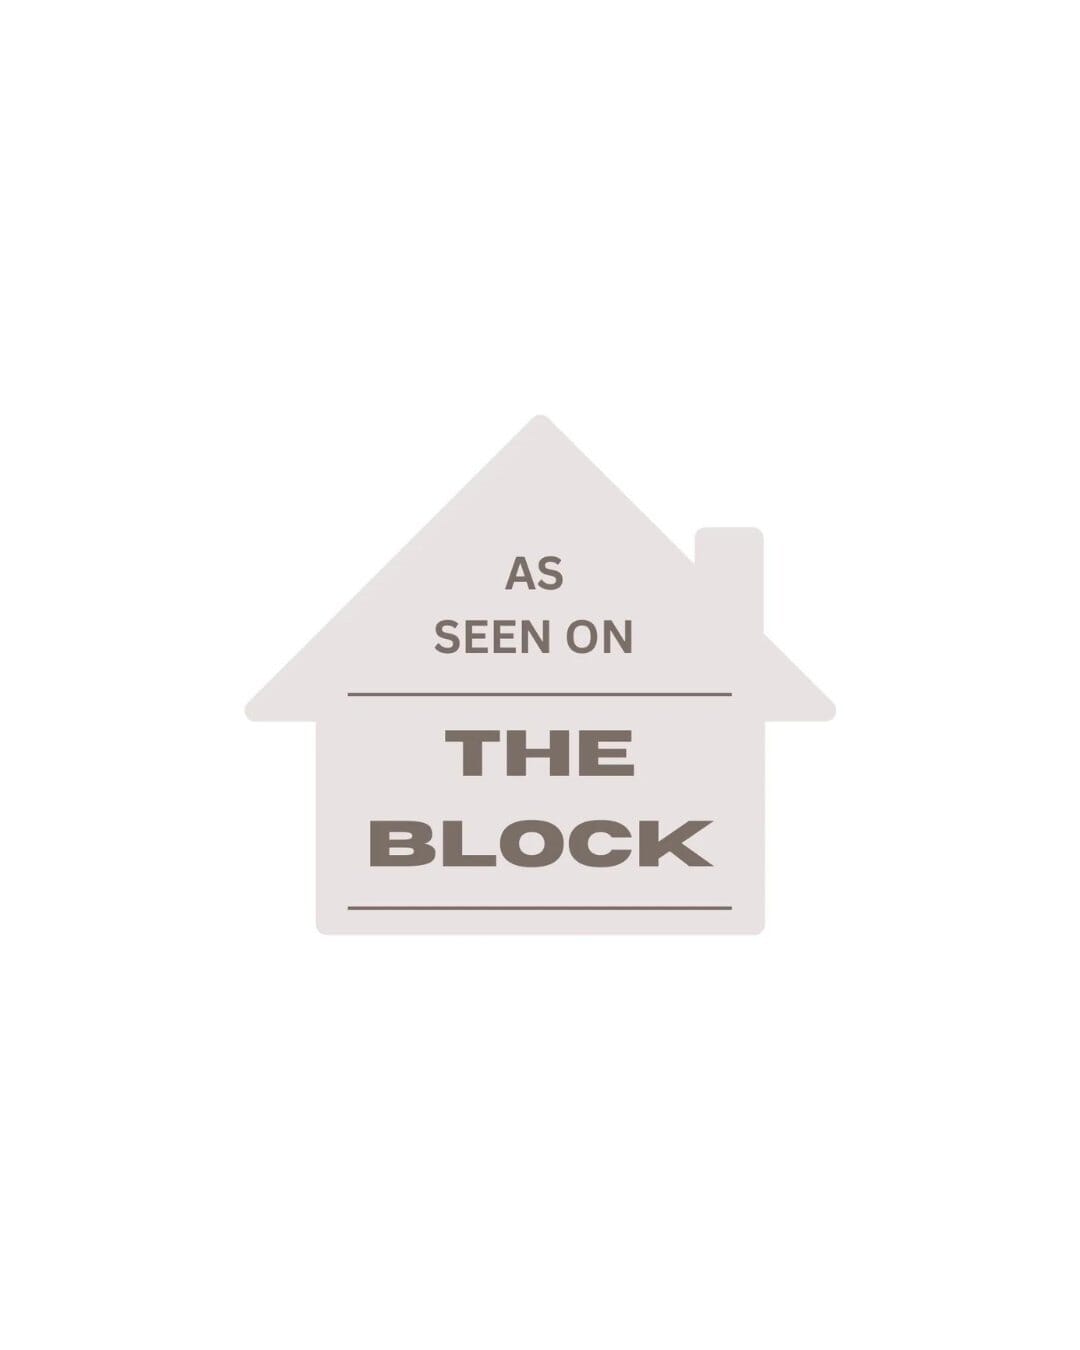 As Seen on 'THE BLOCK'